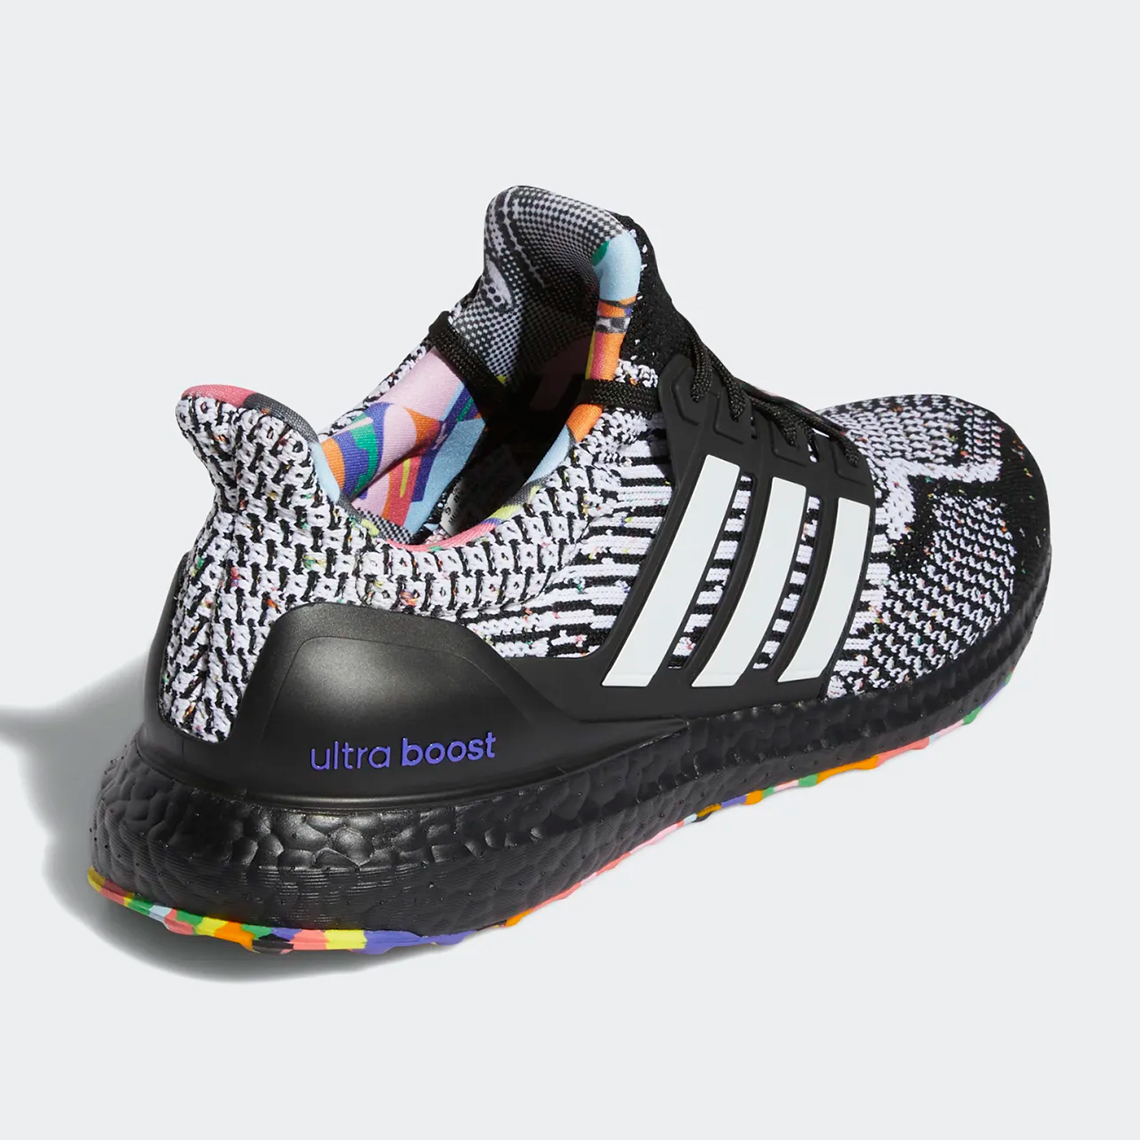 adidas ultraboost 5 dna pride month kris andrew gy4424 6